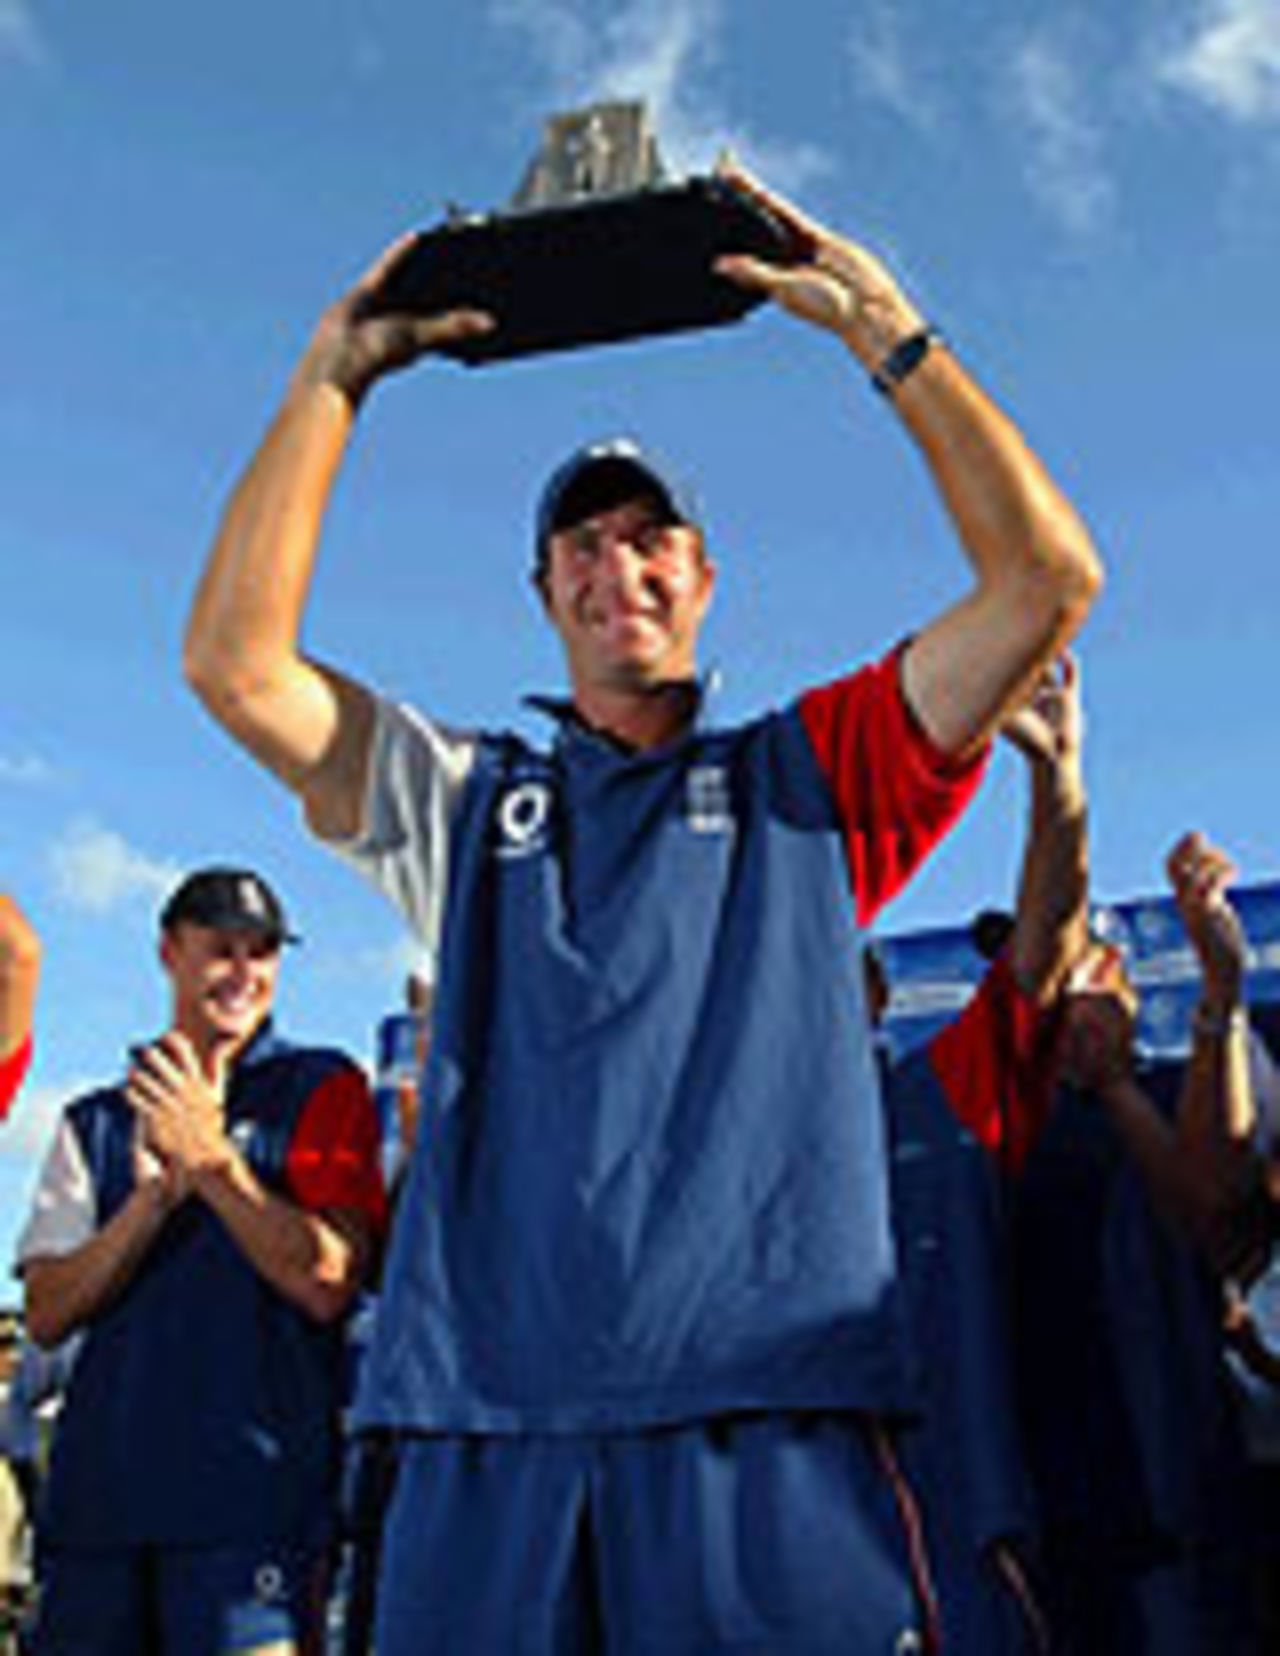 Michael Vaughan with the Wisden Trophy, West Indies v England, 4th Test, Antigua, April 14, 2004